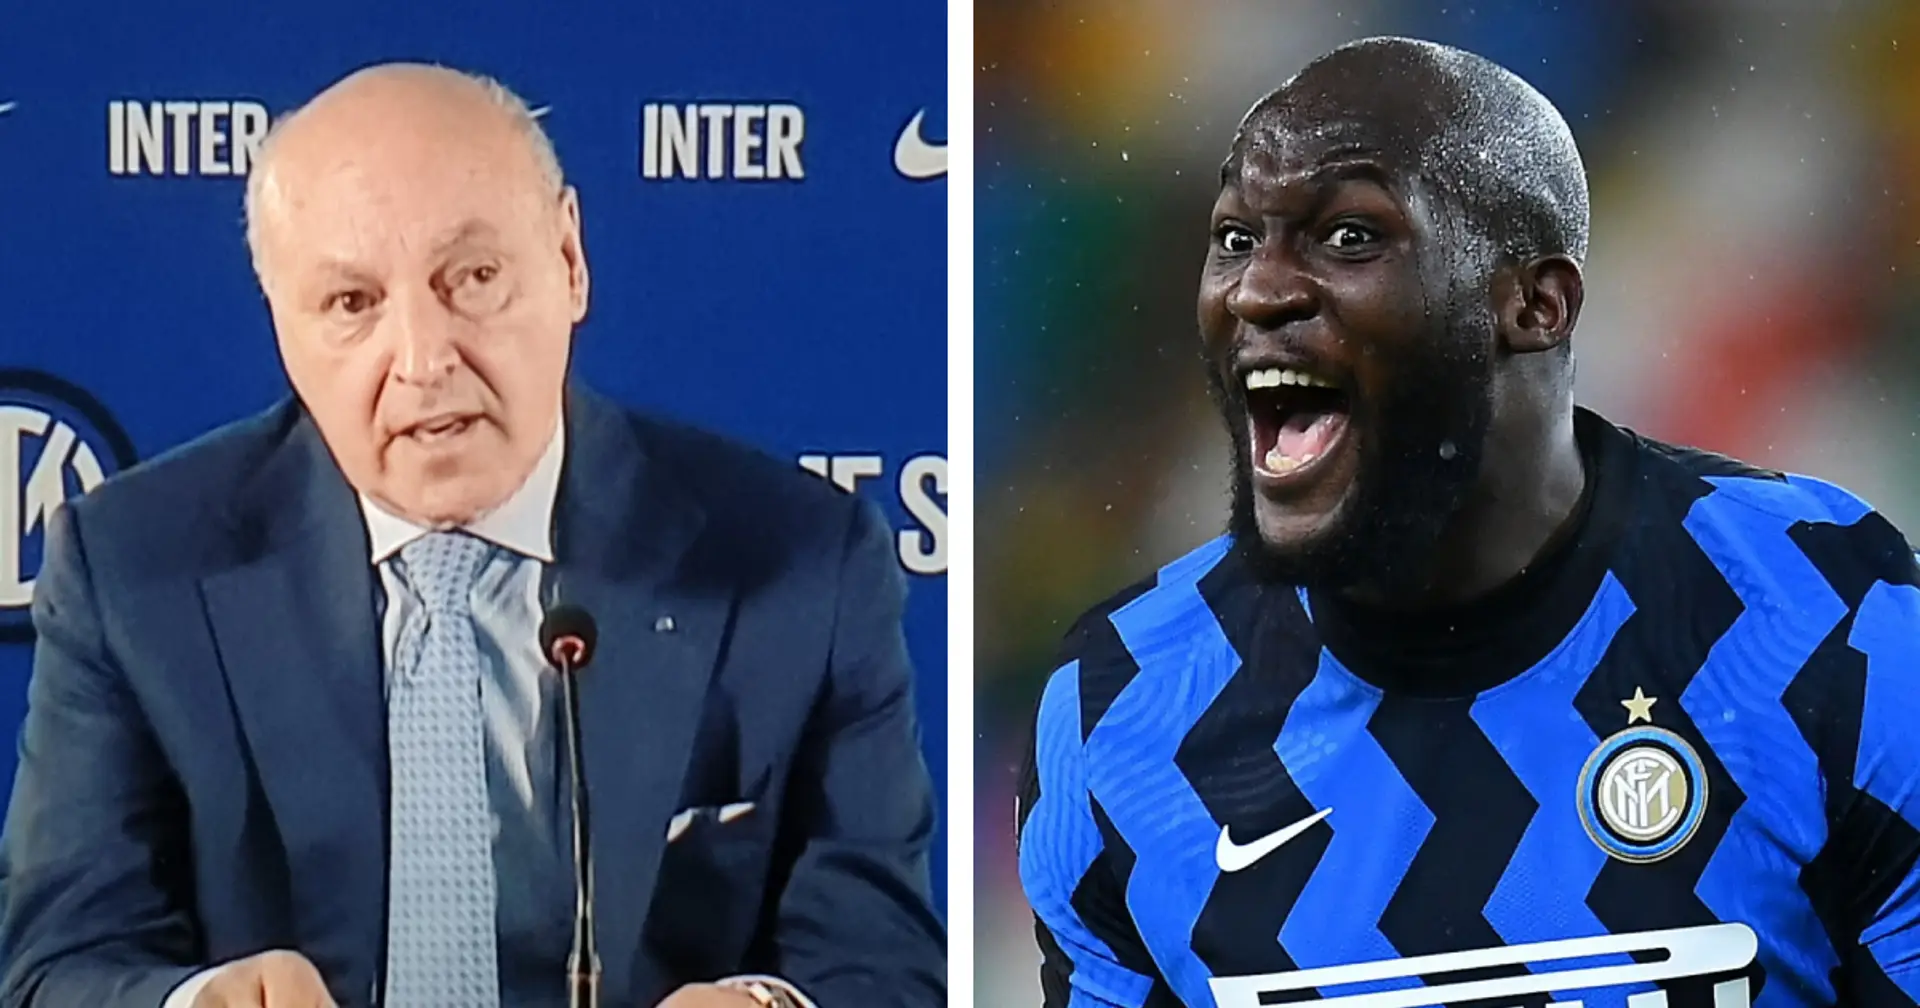 Inter CEO Marotta: 'Lukaku will return to Chelsea, and we don't know what will happen'